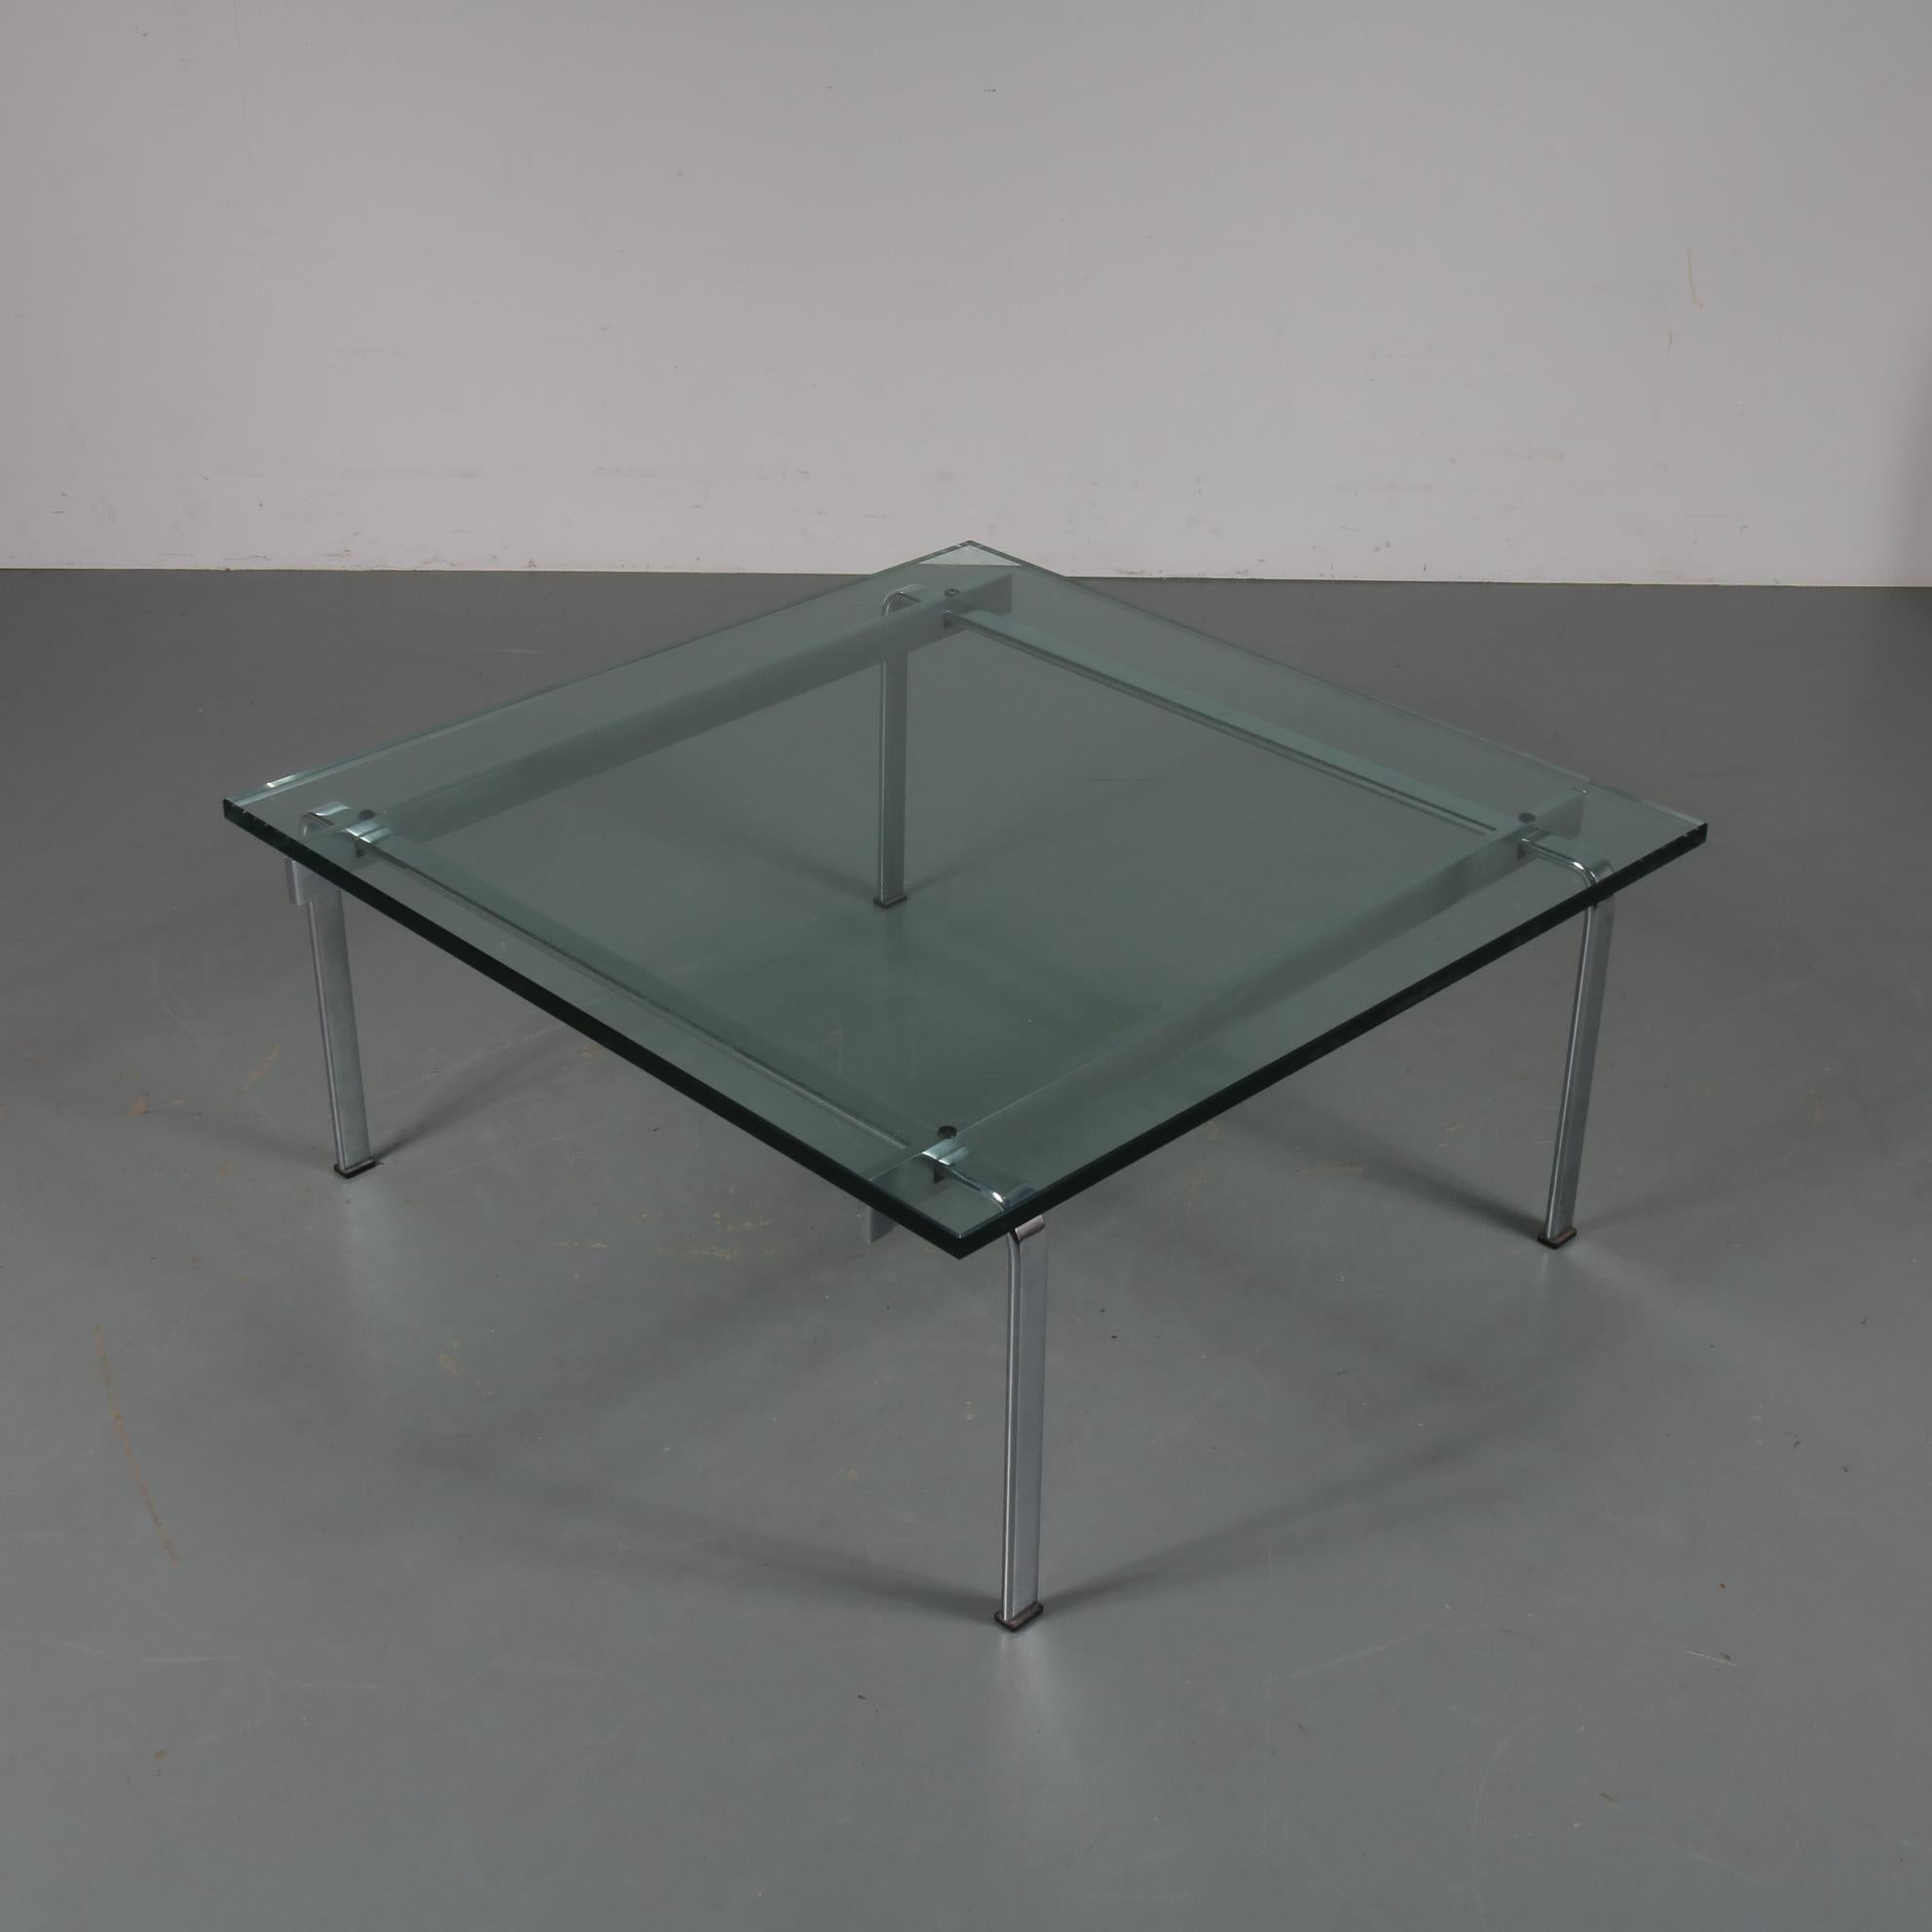 Amazing quality coffee table designed by Preben Fabricius, manufactured by Kill International in Denmark around 1960.

This stunning piece has a very well-crafted chrome plated metal base. The legs and structure are made of rectangular shapes with